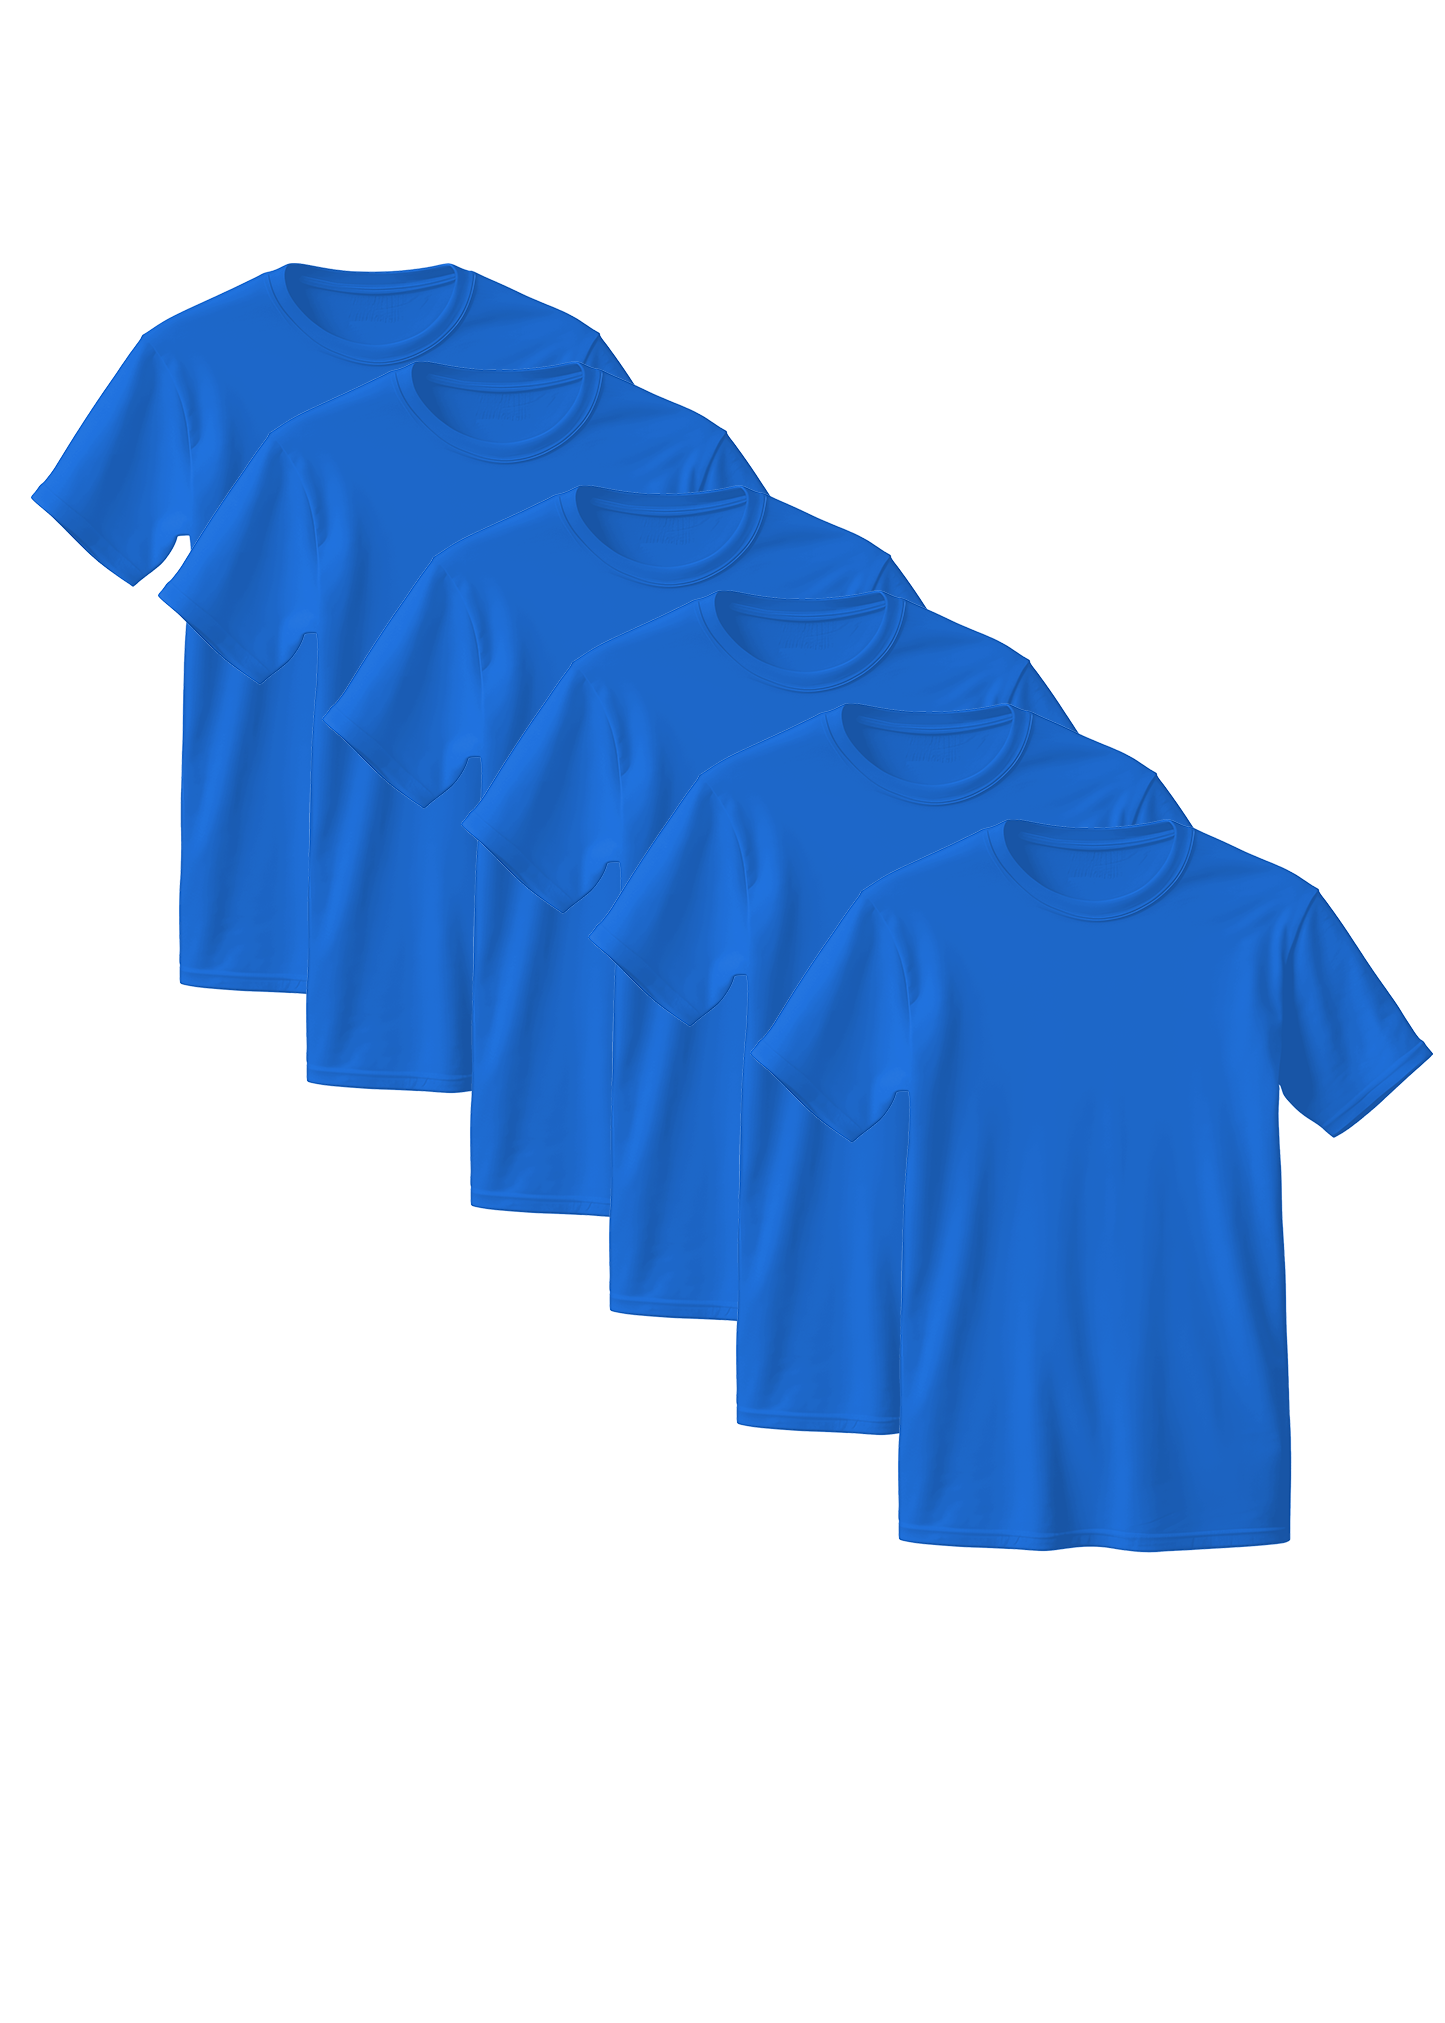 Royal Blue Combed Cotton T-Shirt 6-Pack